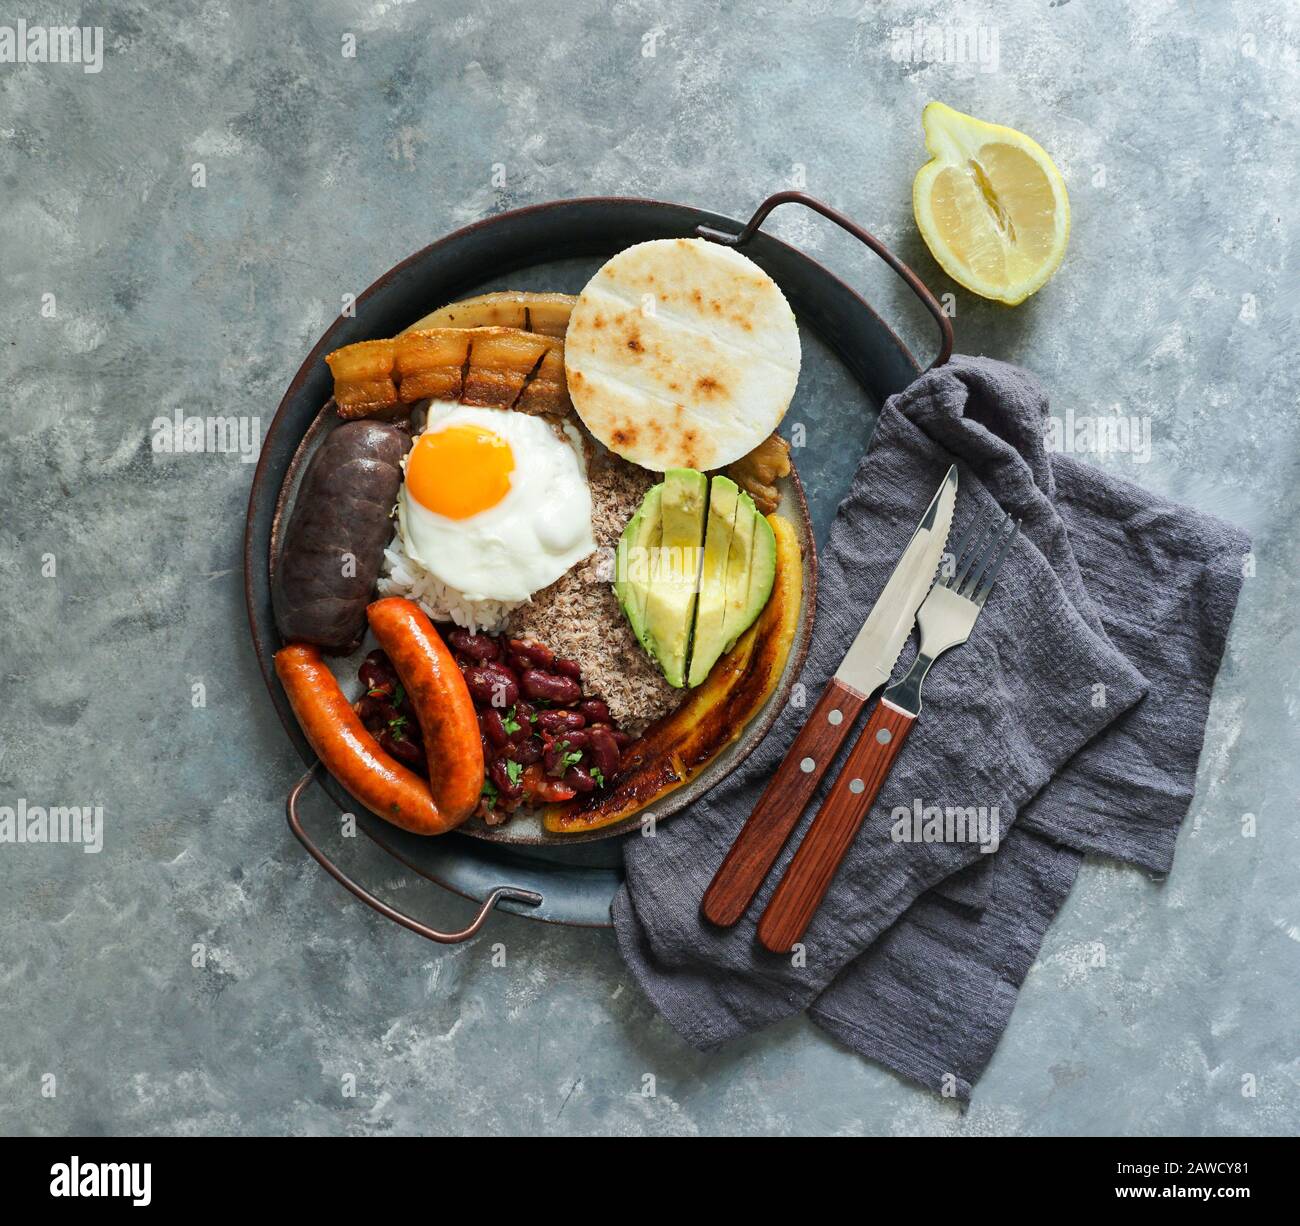 Colombian food. Bandeja paisa, typical dish at the Antioquia region of Colombia - chicharron (fried pork belly), black pudding, sausage, arepa, beans, Stock Photo